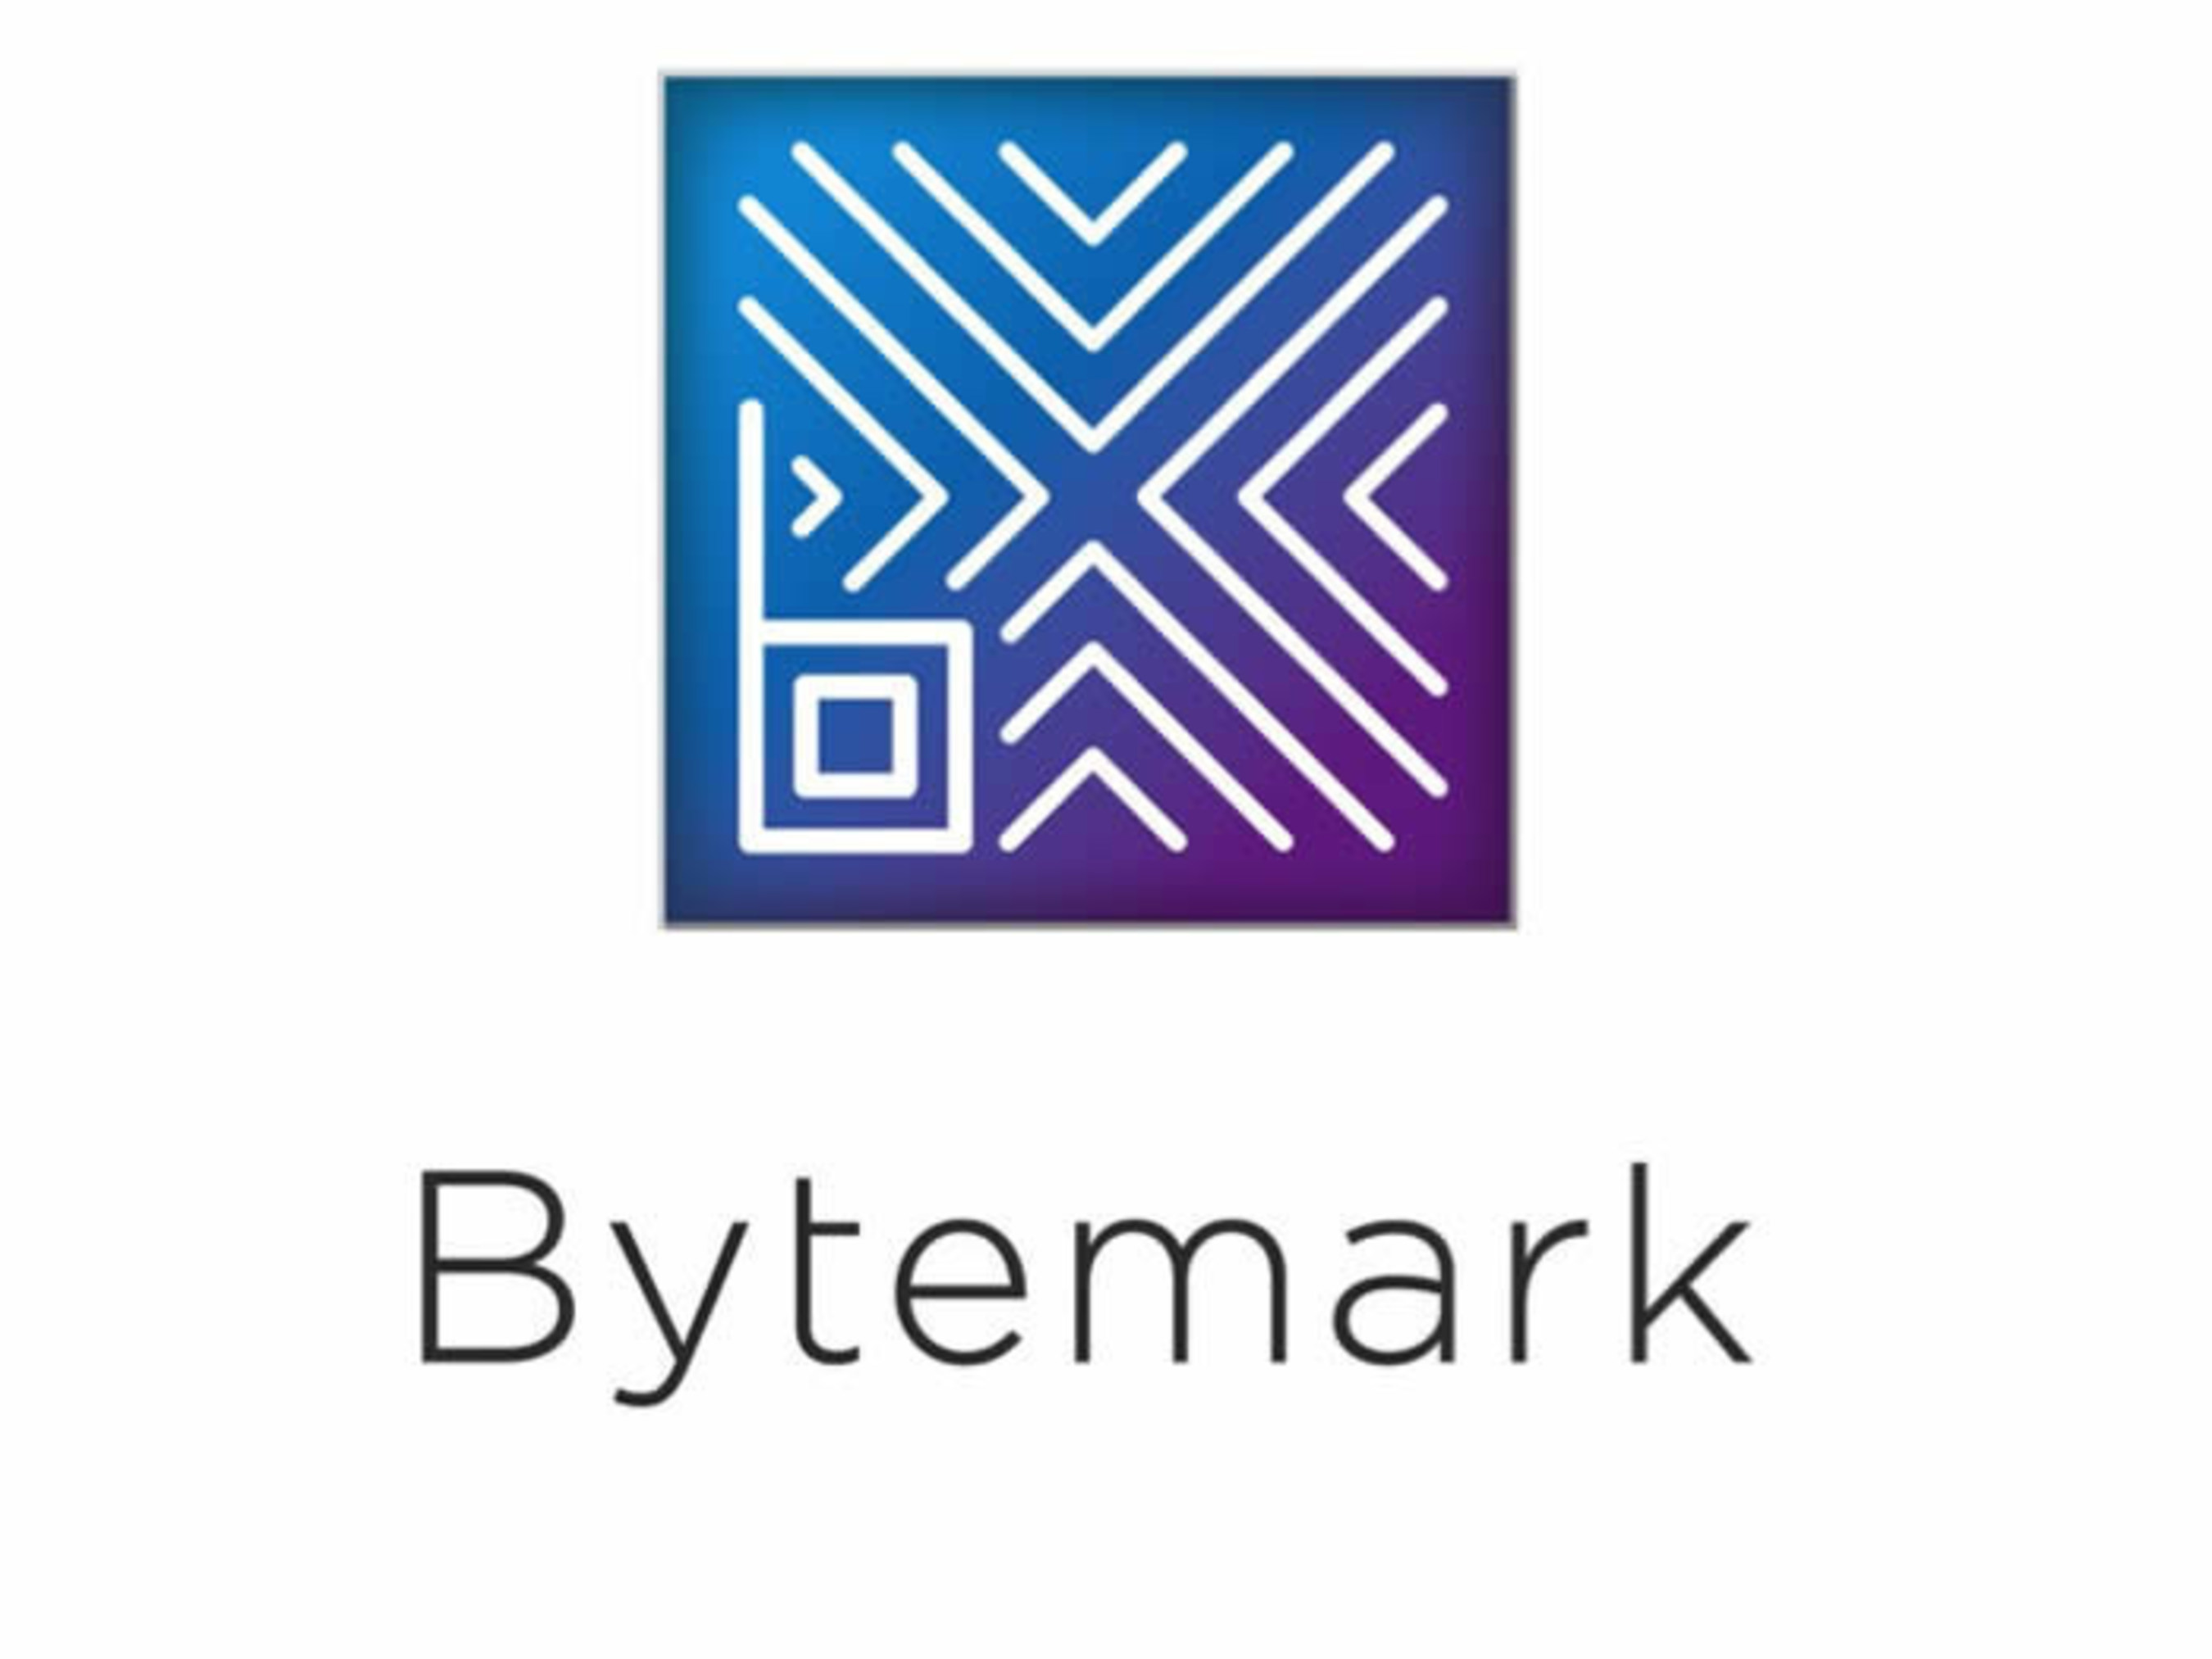 Bytemark, a leading provider of mobile commerce solutions for the mass transit industry